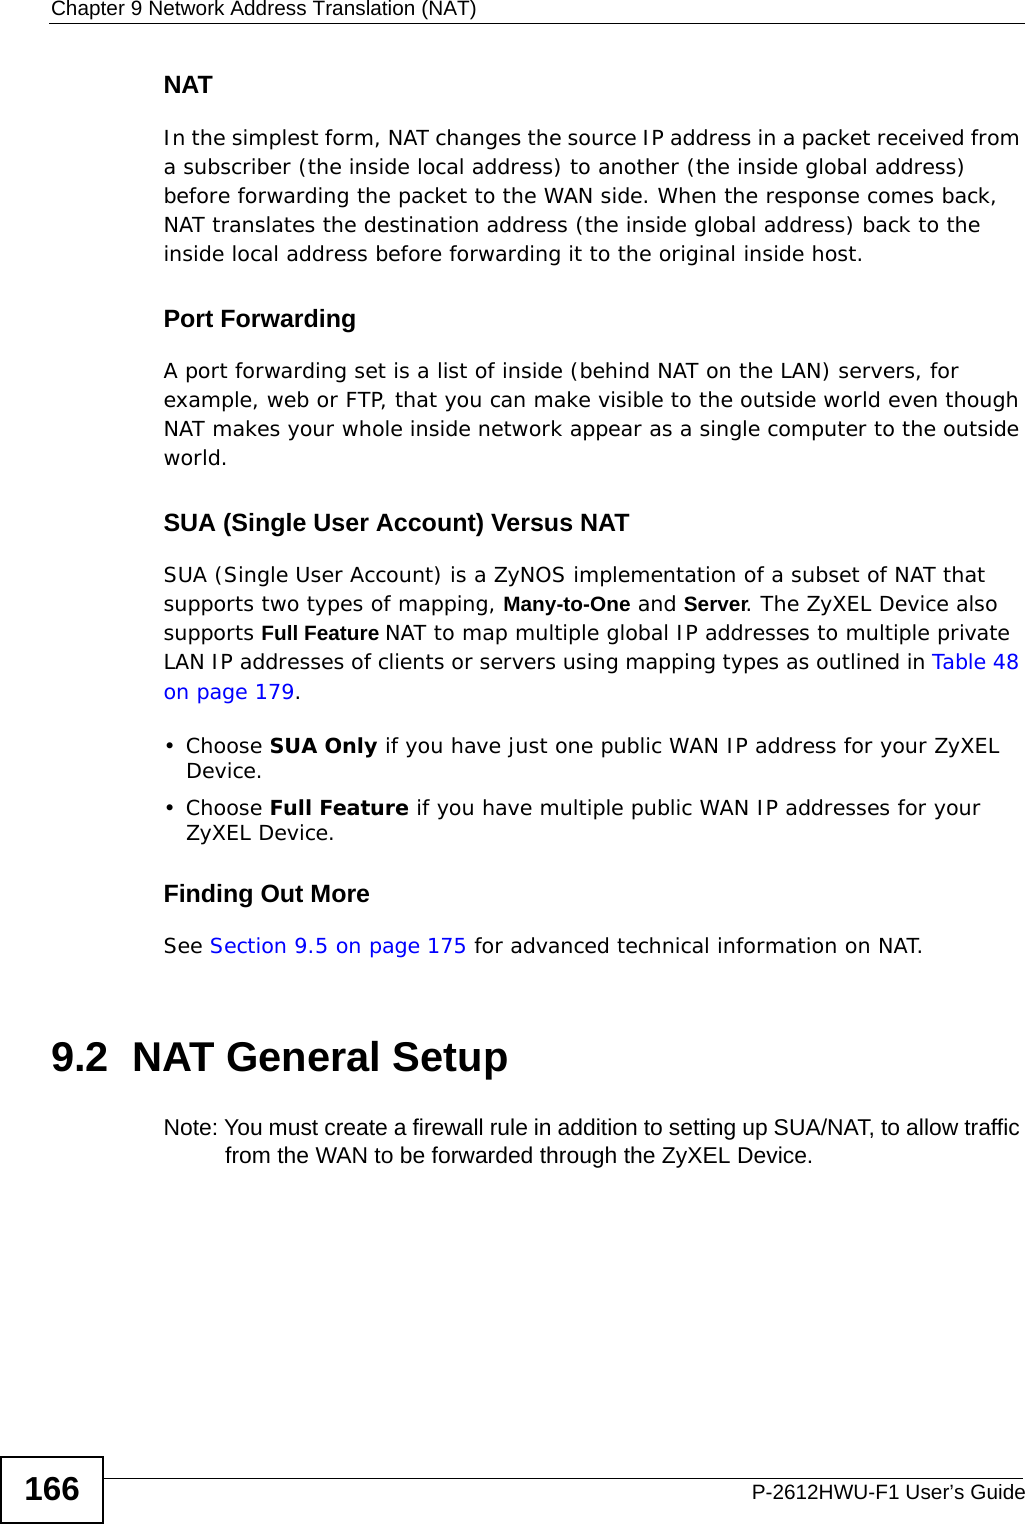 Chapter 9 Network Address Translation (NAT)P-2612HWU-F1 User’s Guide166NATIn the simplest form, NAT changes the source IP address in a packet received from a subscriber (the inside local address) to another (the inside global address) before forwarding the packet to the WAN side. When the response comes back, NAT translates the destination address (the inside global address) back to the inside local address before forwarding it to the original inside host.Port ForwardingA port forwarding set is a list of inside (behind NAT on the LAN) servers, for example, web or FTP, that you can make visible to the outside world even though NAT makes your whole inside network appear as a single computer to the outside world.SUA (Single User Account) Versus NATSUA (Single User Account) is a ZyNOS implementation of a subset of NAT that supports two types of mapping, Many-to-One and Server. The ZyXEL Device also supports Full Feature NAT to map multiple global IP addresses to multiple private LAN IP addresses of clients or servers using mapping types as outlined in Table 48 on page 179. • Choose SUA Only if you have just one public WAN IP address for your ZyXEL Device.• Choose Full Feature if you have multiple public WAN IP addresses for your ZyXEL Device.Finding Out MoreSee Section 9.5 on page 175 for advanced technical information on NAT.9.2  NAT General Setup Note: You must create a firewall rule in addition to setting up SUA/NAT, to allow traffic from the WAN to be forwarded through the ZyXEL Device. 